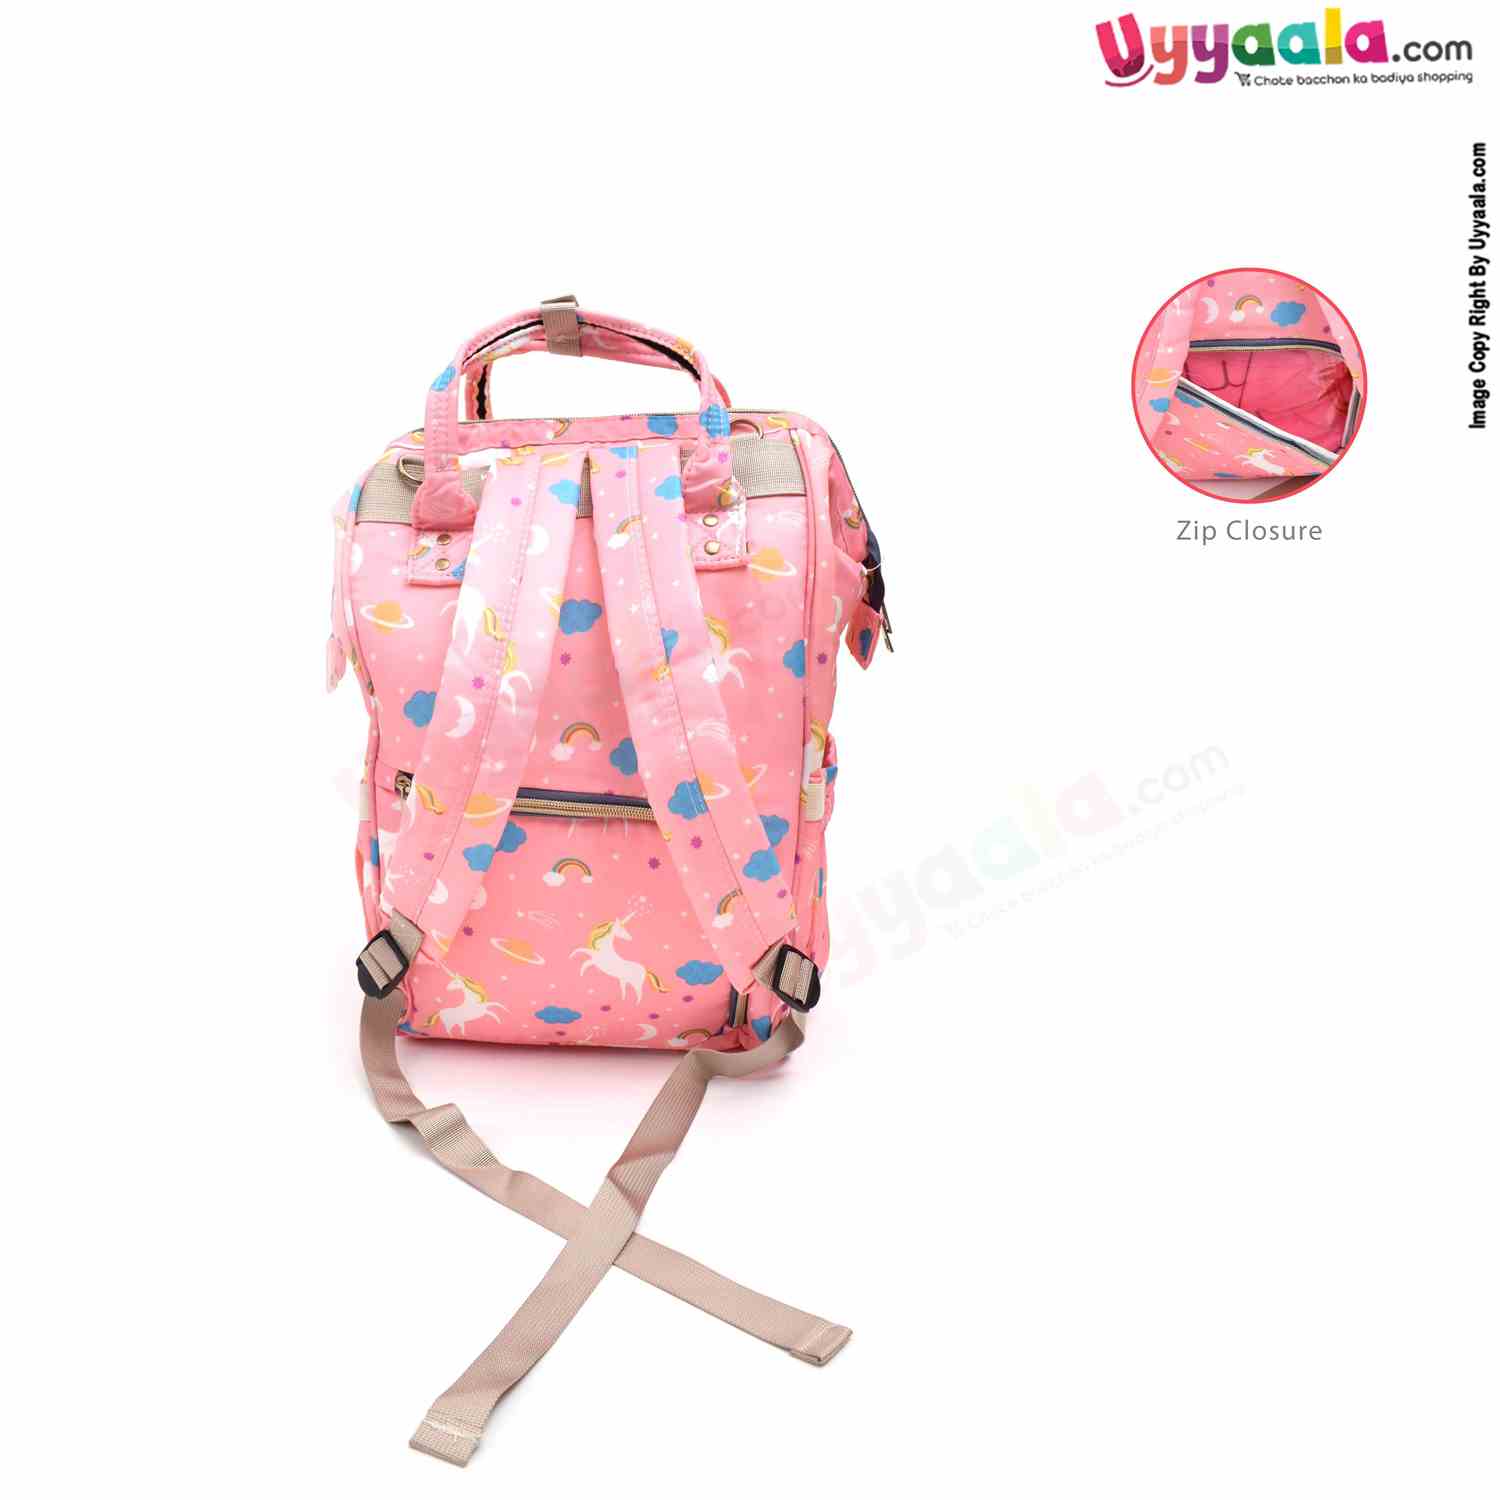 Mother's back pack (diaper bag) comfortable for travelling mothers, premium quality - size(45*33cm) - pink